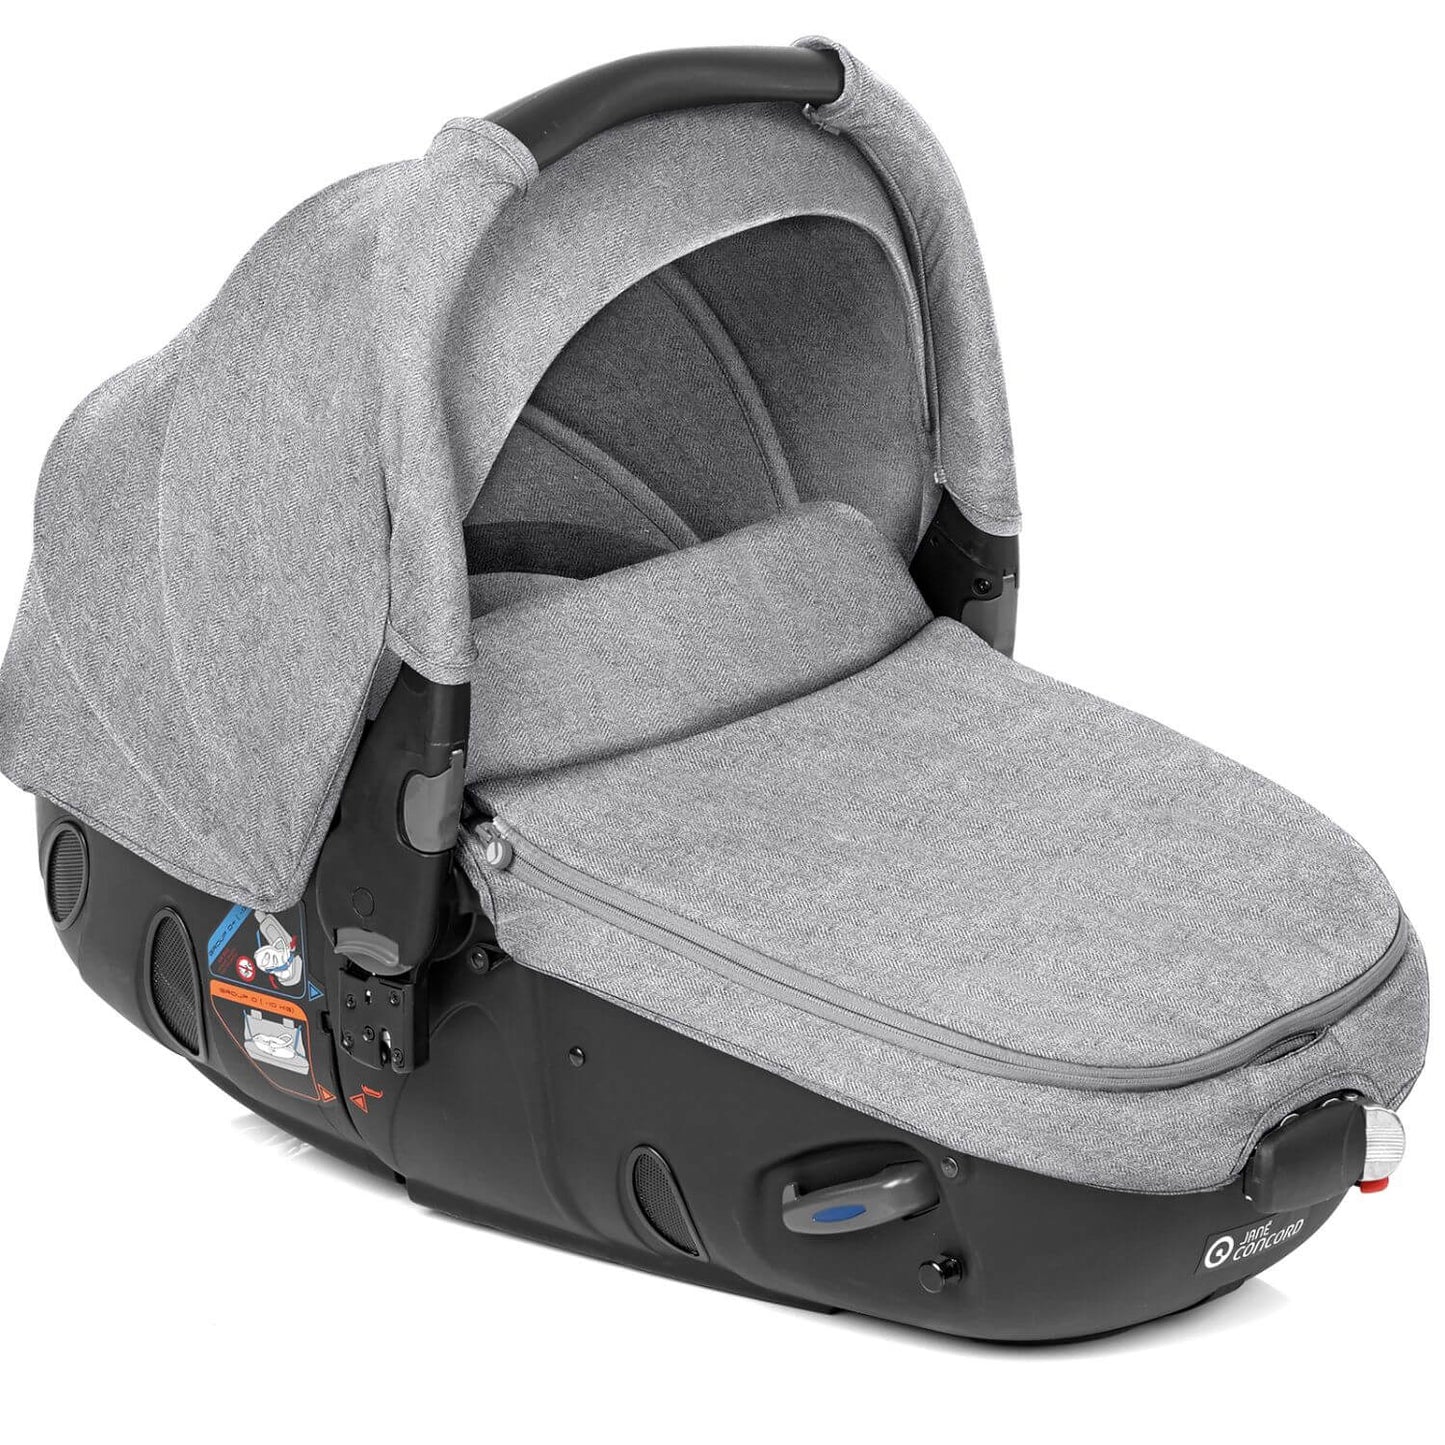 Jané Matrix Light 2 Car Seat - The epitome of safety and comfort